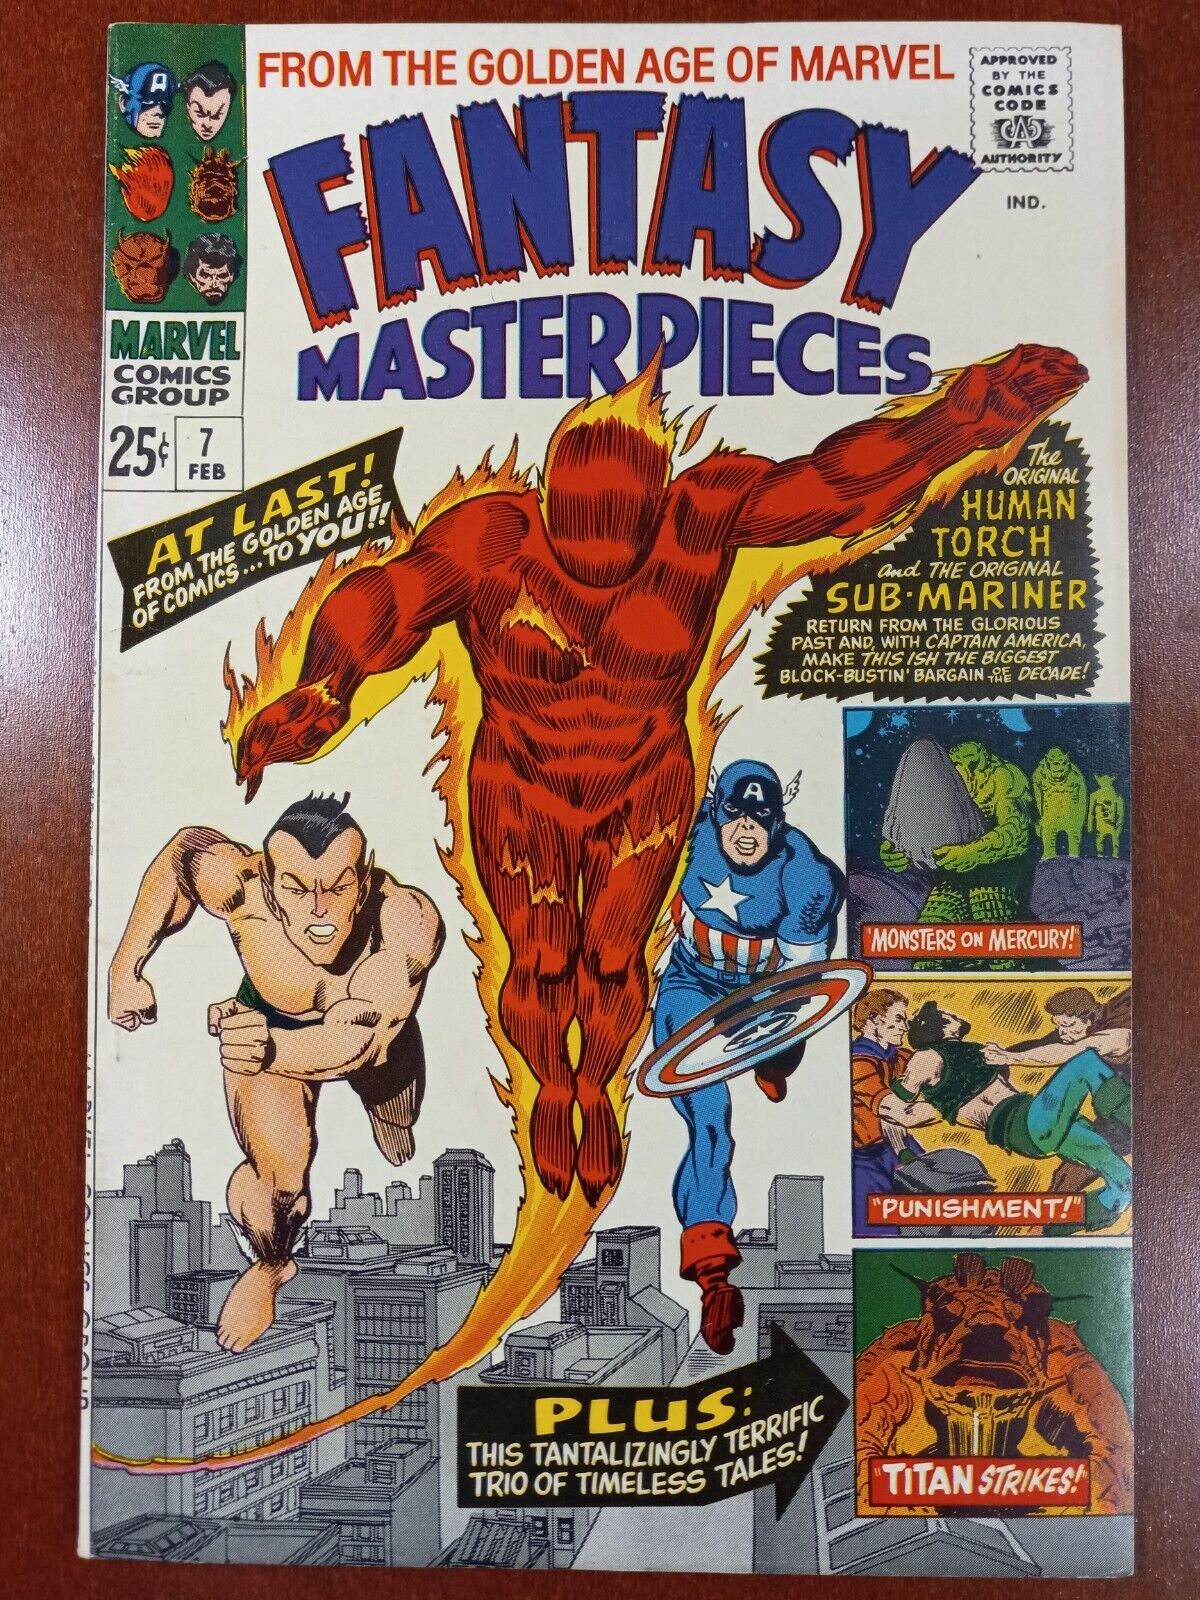 Fantasy Masterpieces #7..1967..G. A. Subby and Torch..Higher grade beauty..